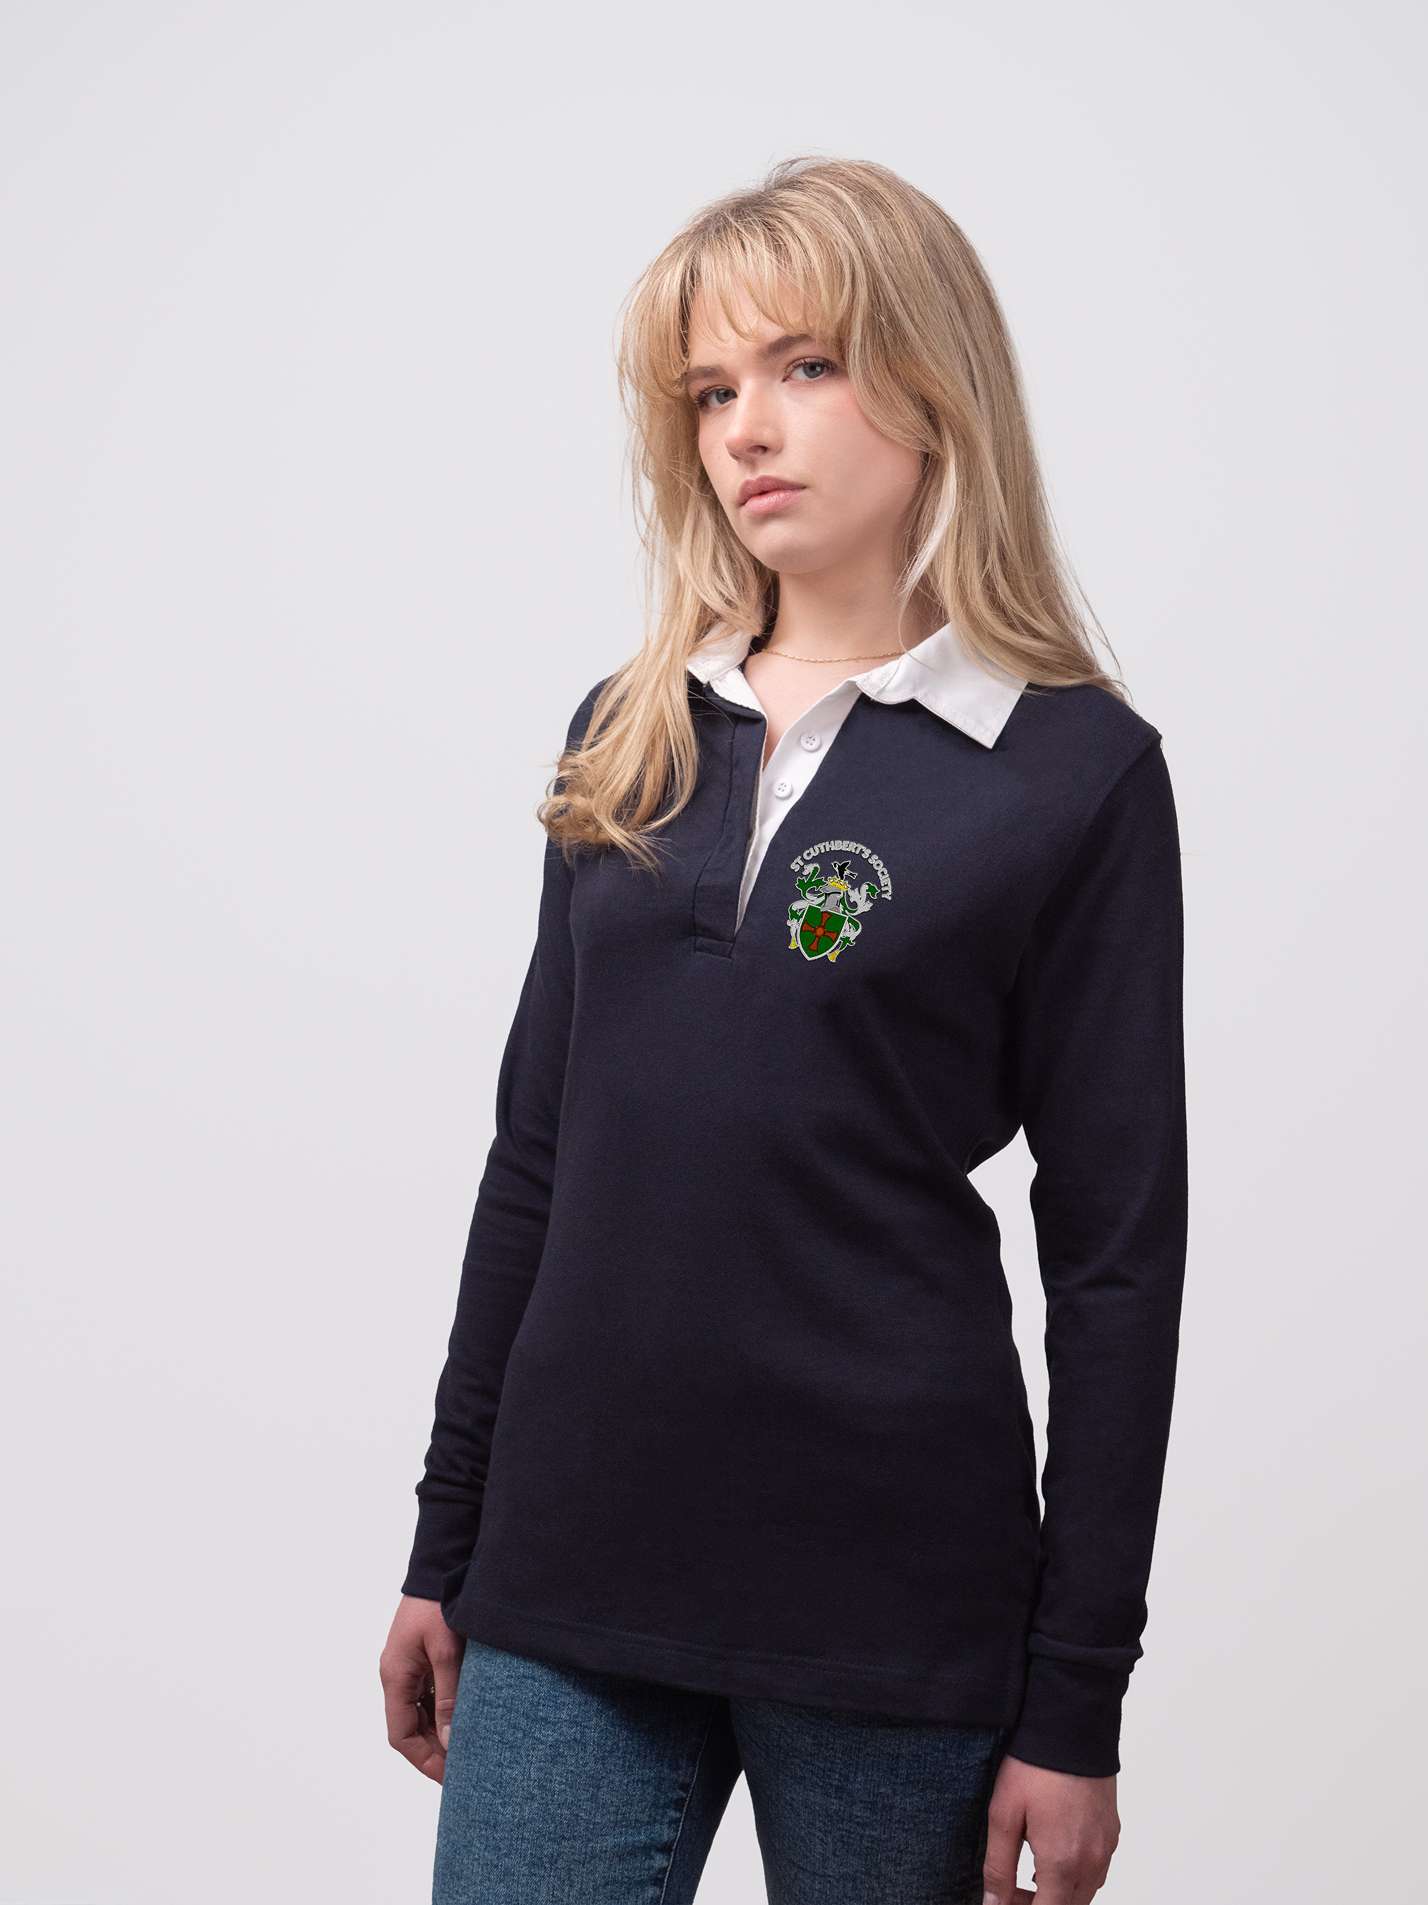 St Cuthbert's Society Durham Classic Ladies Rugby Shirt